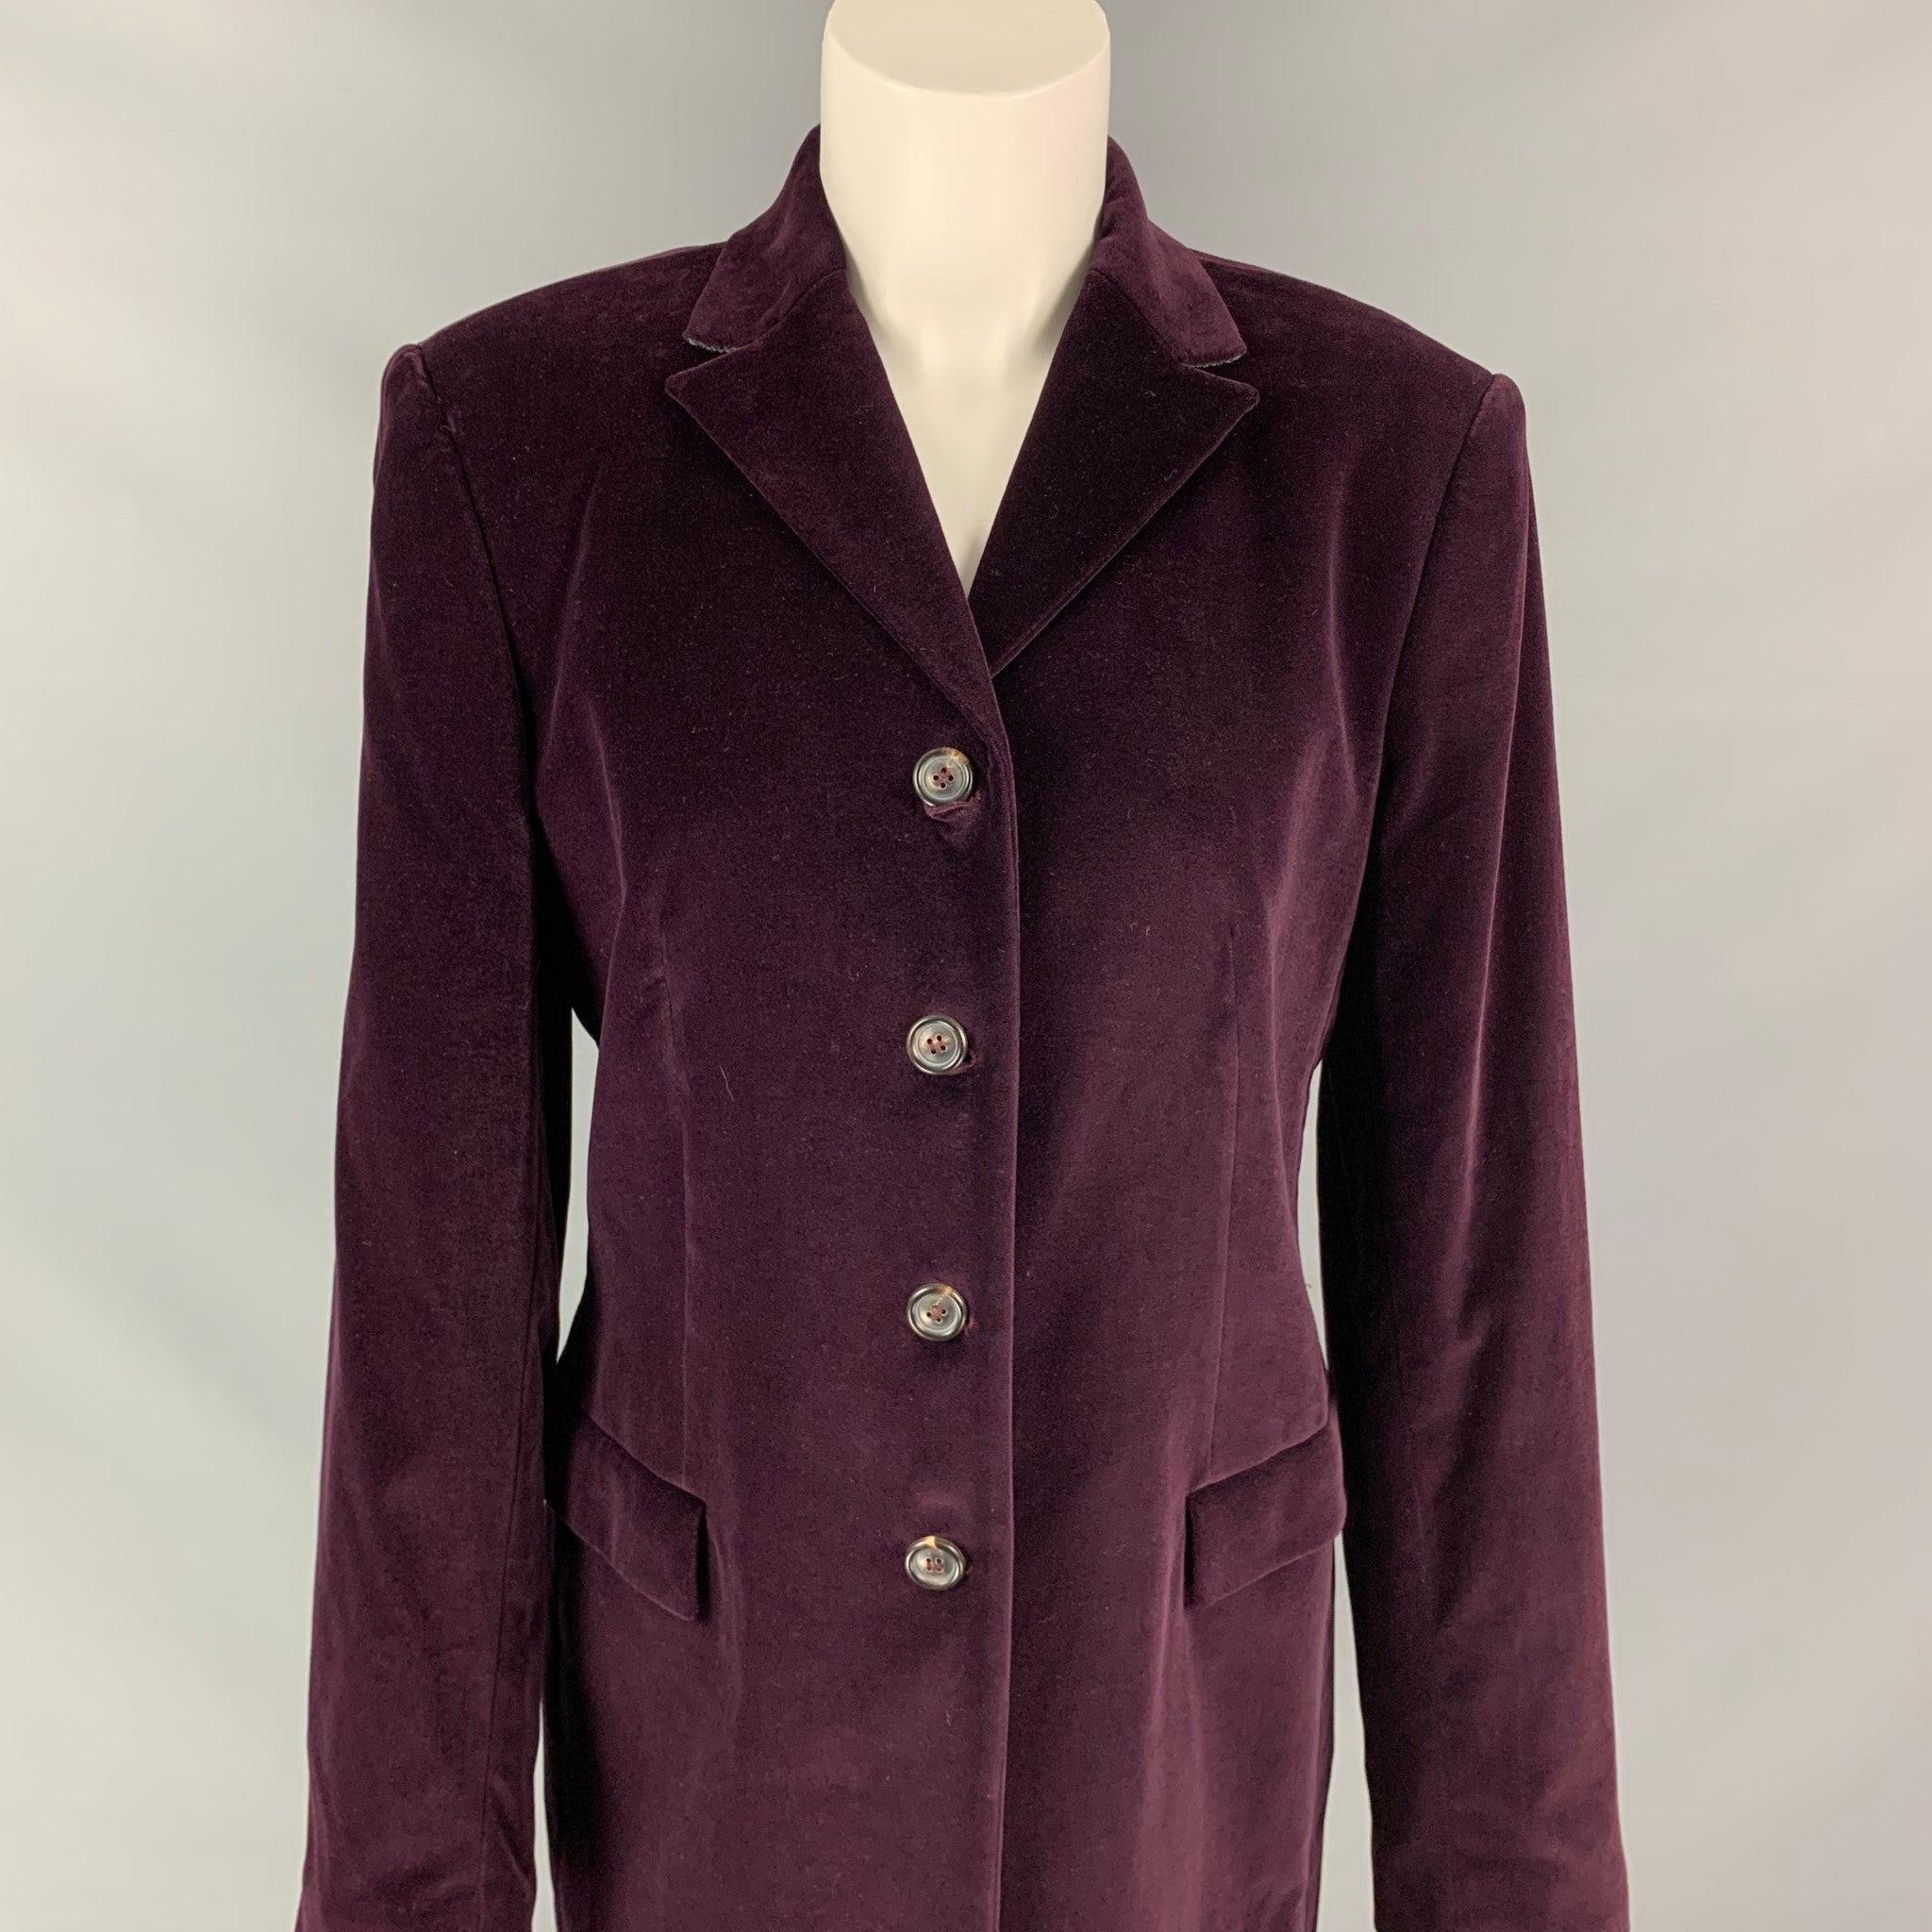 PIAZZA SEMPIONE coat comes in a purple cotton velvet with a full liner featuring a notch lapel, flap pockets, and a three button closure. Made in Italy.
Very Good
Pre-Owned Condition. 

Marked:  44 

Measurements: 
 
Shoulder: 16 inches Bust: 36